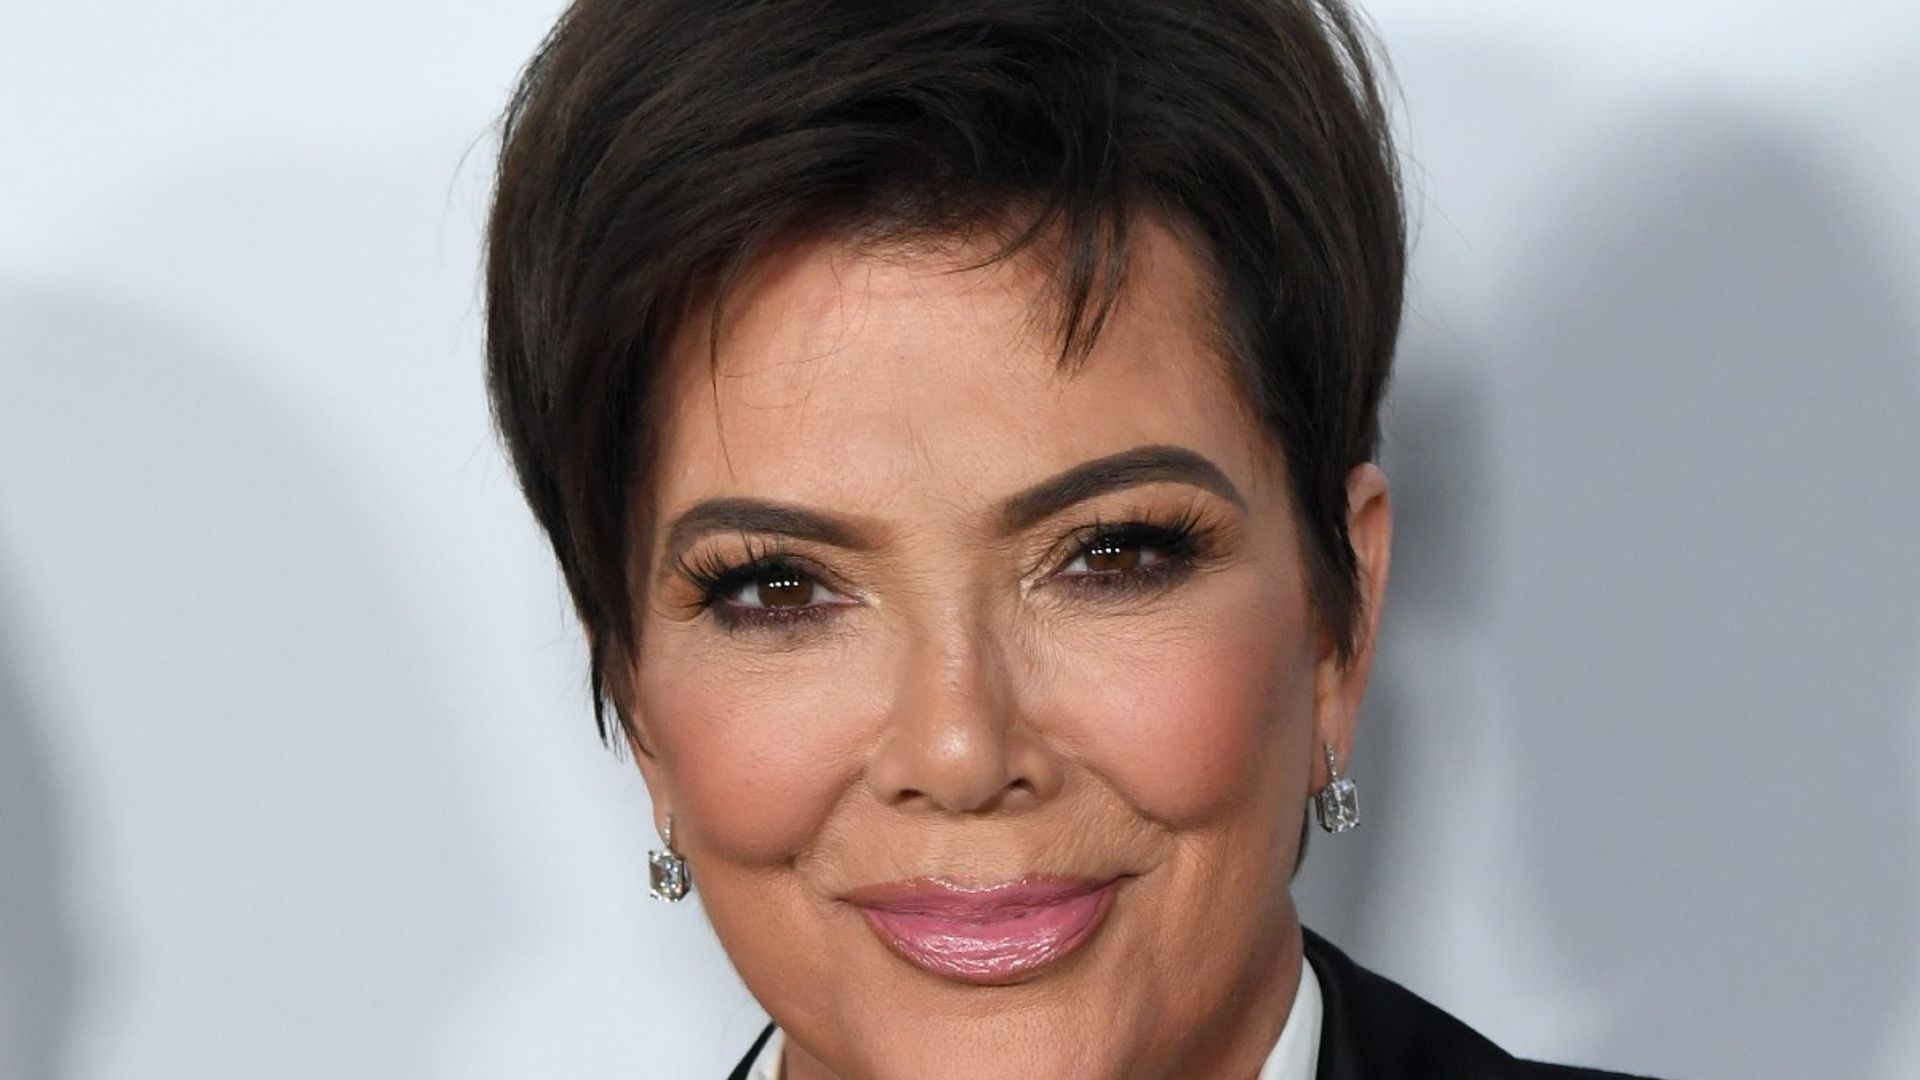 Kris Jenner looks unrecognisable with volume-heavy hair in unseen family photo